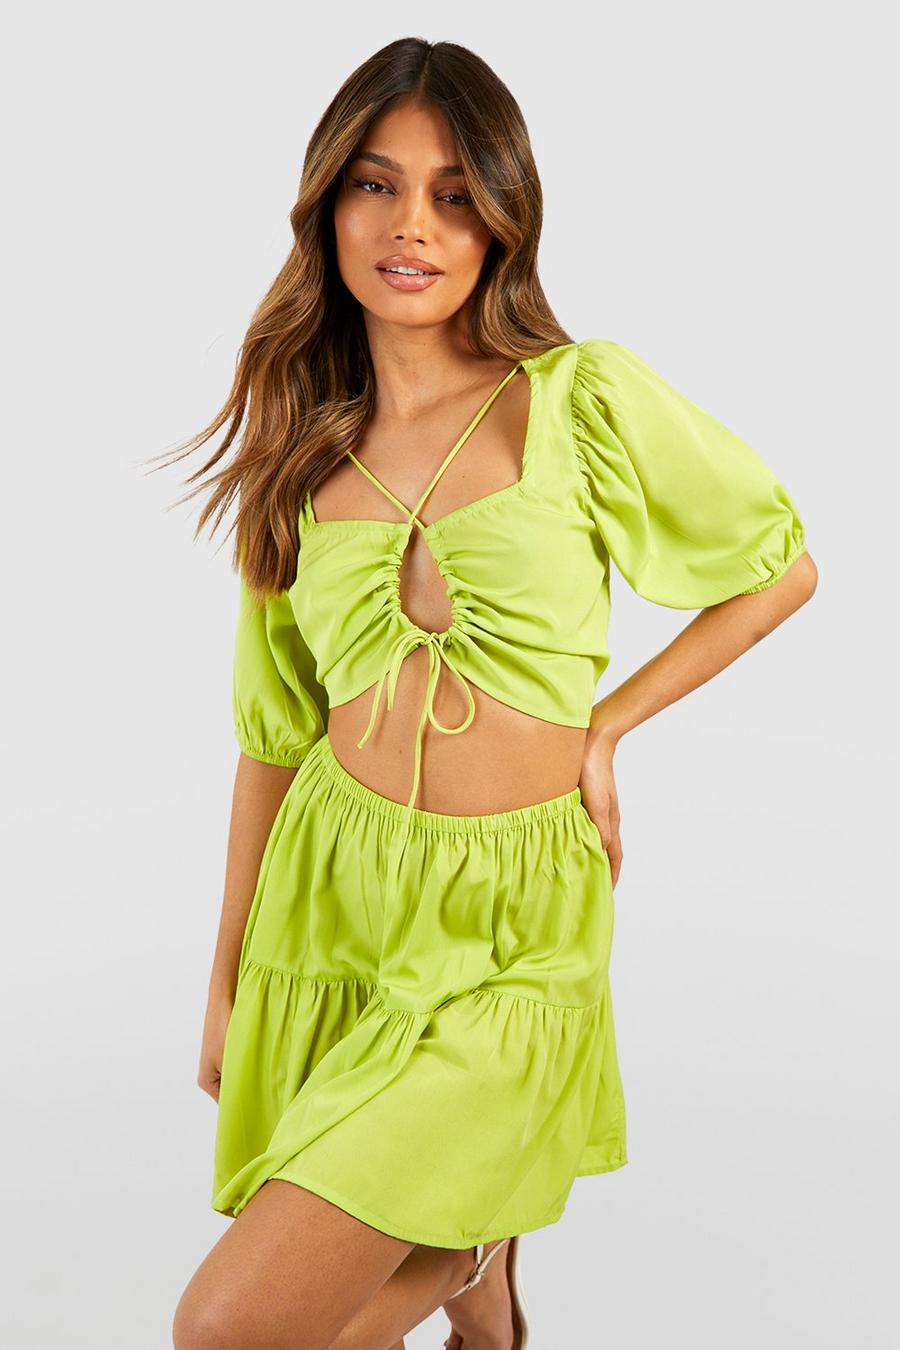 Chartreuse yellow Strappy Sweetheart Bralette & Mini Skirt 